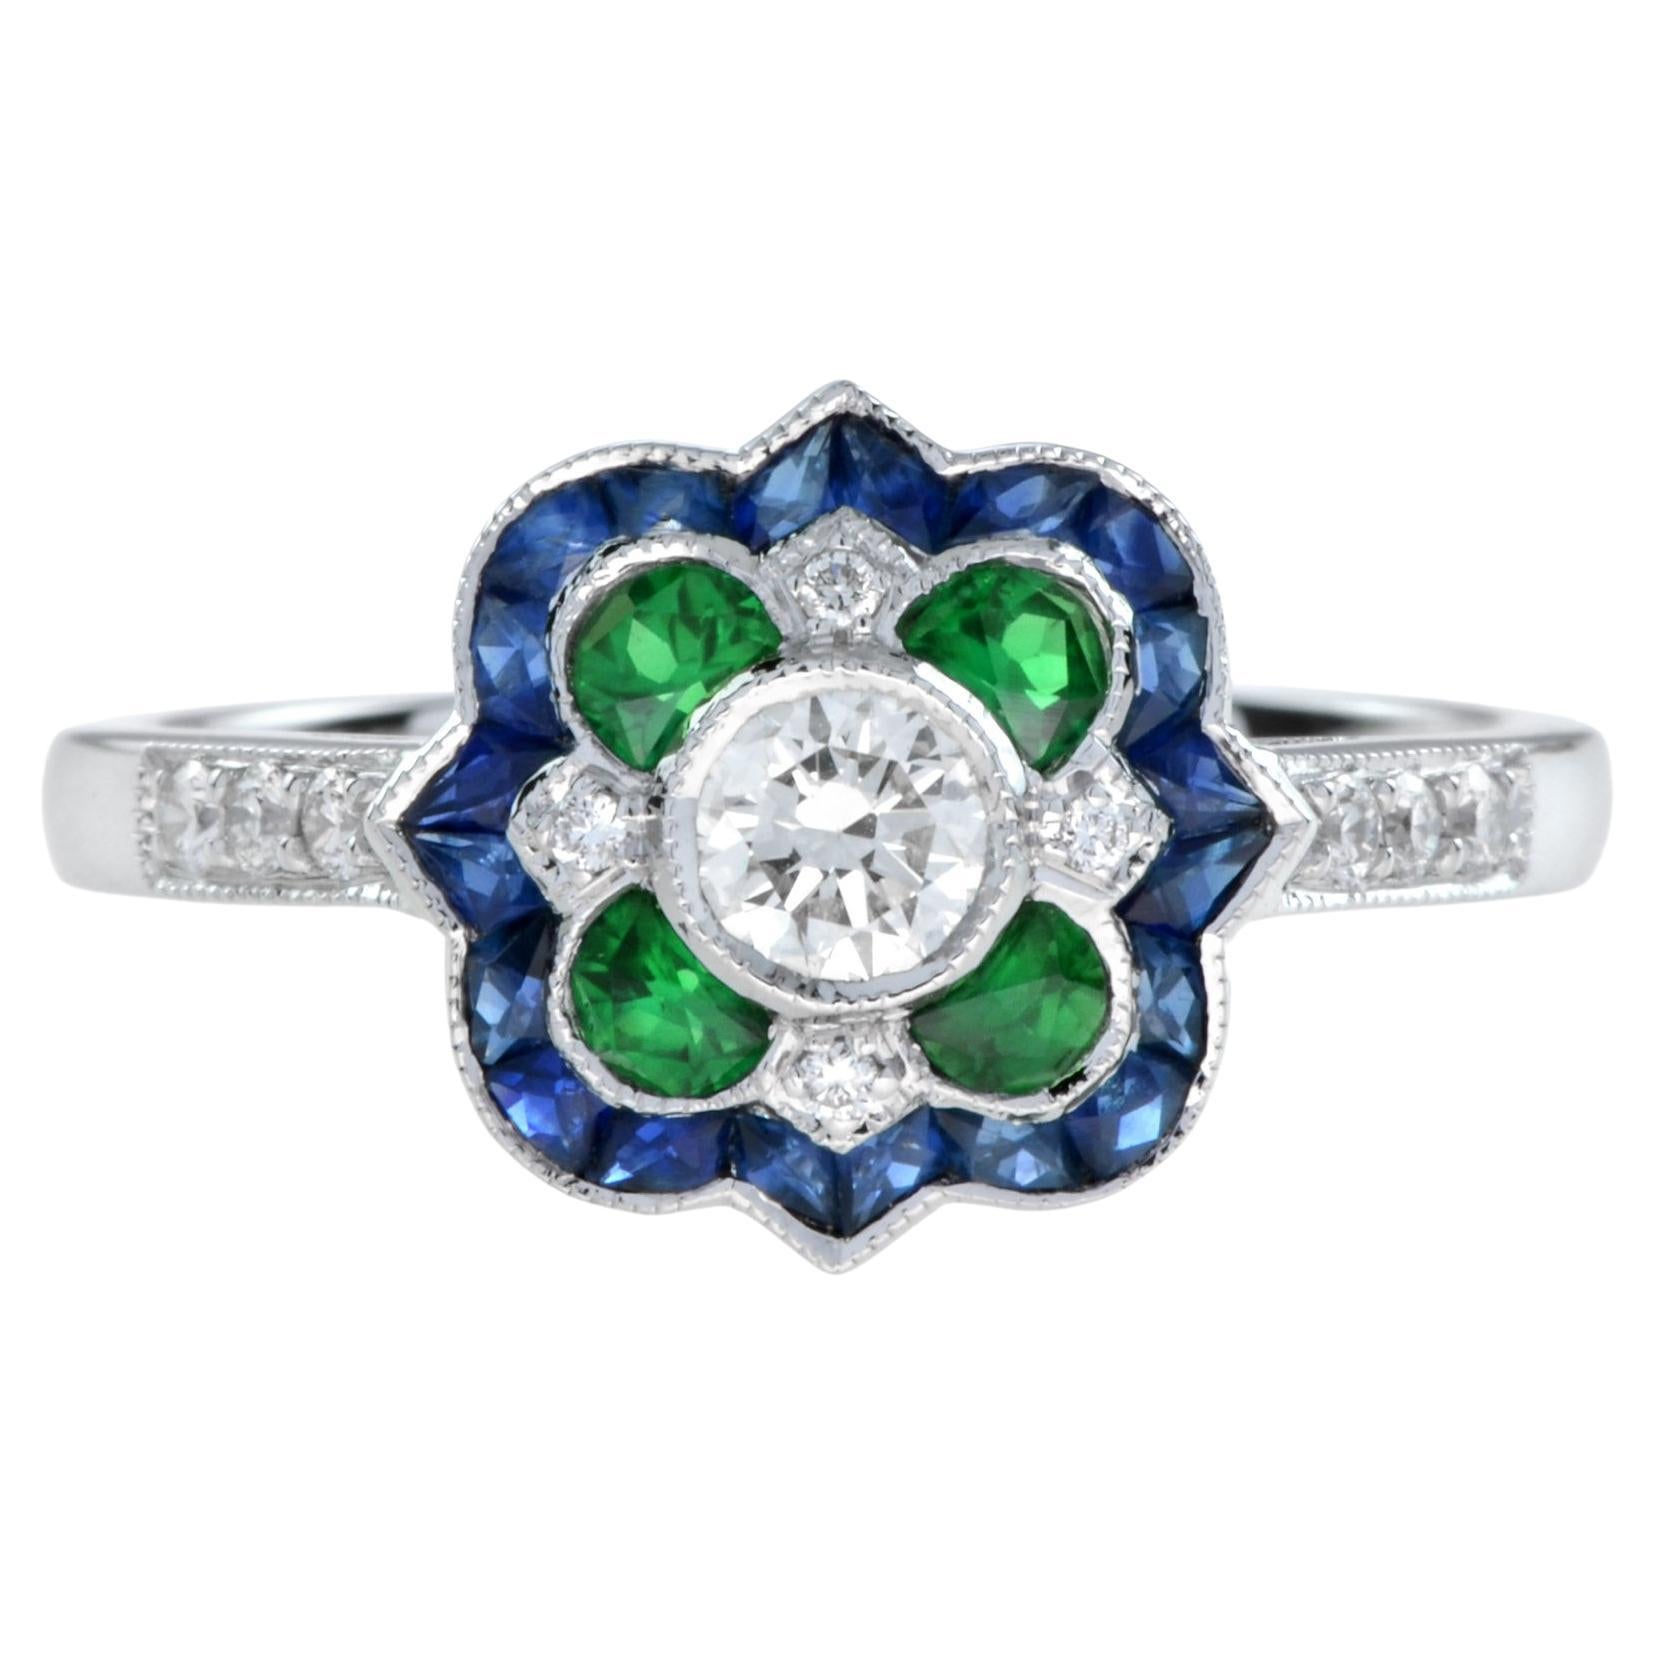 For Sale:  Art Deco Style Diamond with Emerald and Sapphire Ring in 18K White Gold